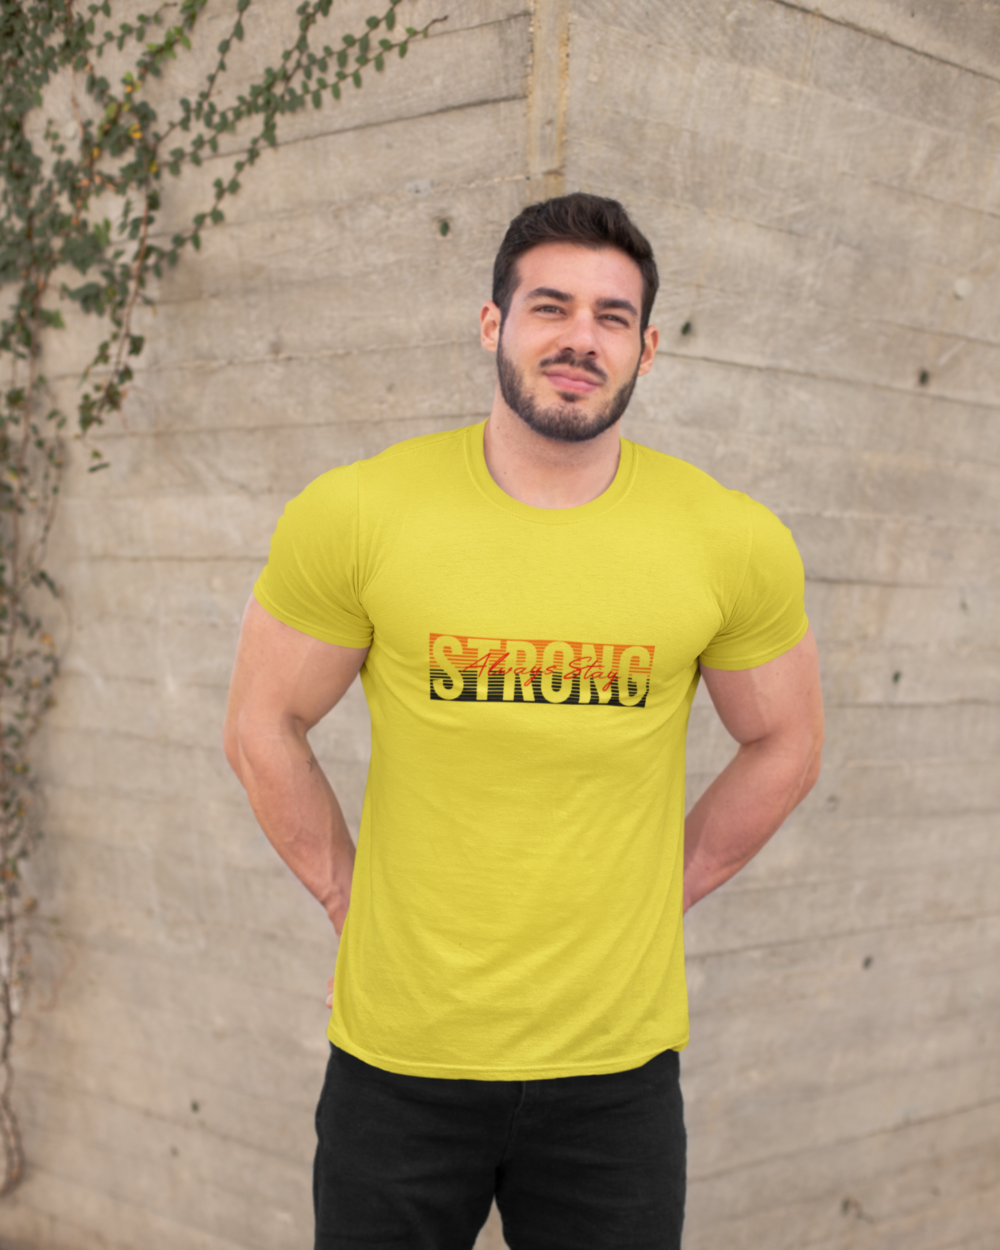 Always Stay Strong T-Shirt